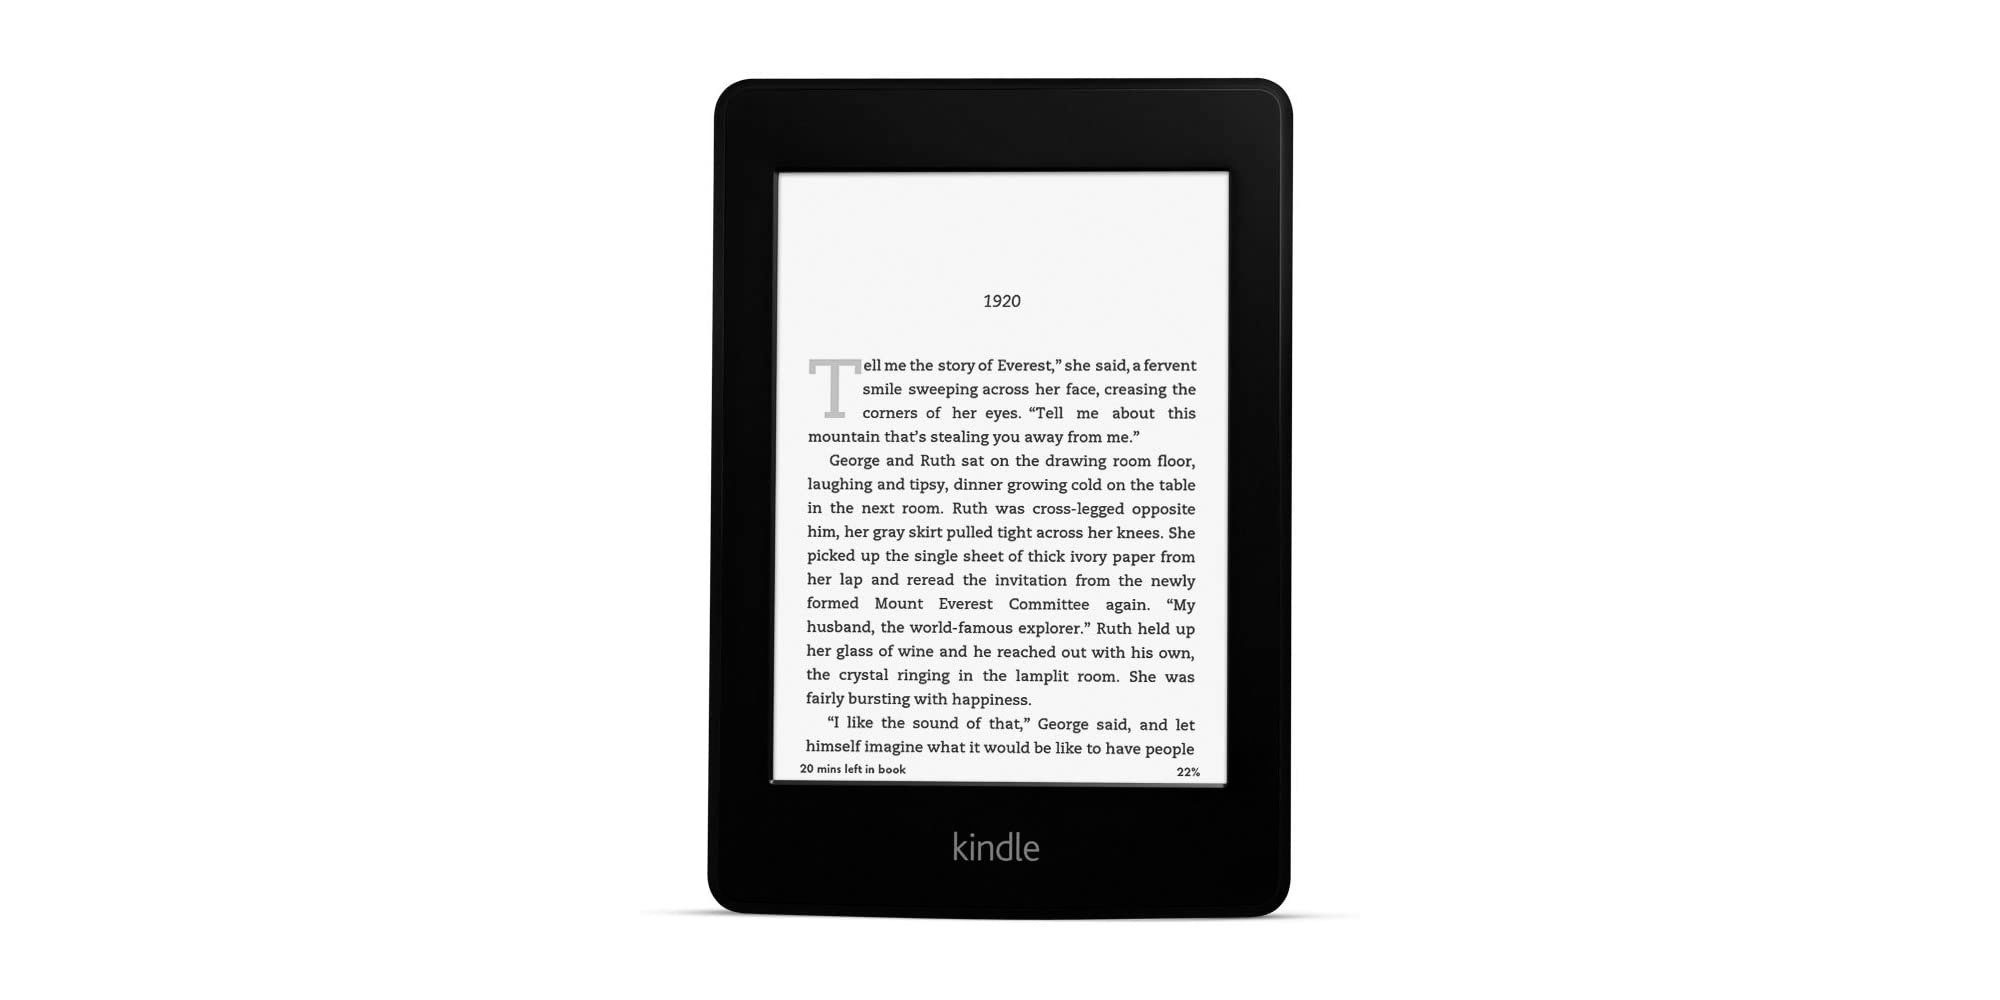 Kindle Paperwhite has a backlight, Wi-Fi, and 3G: $40 (Refurb, Orig